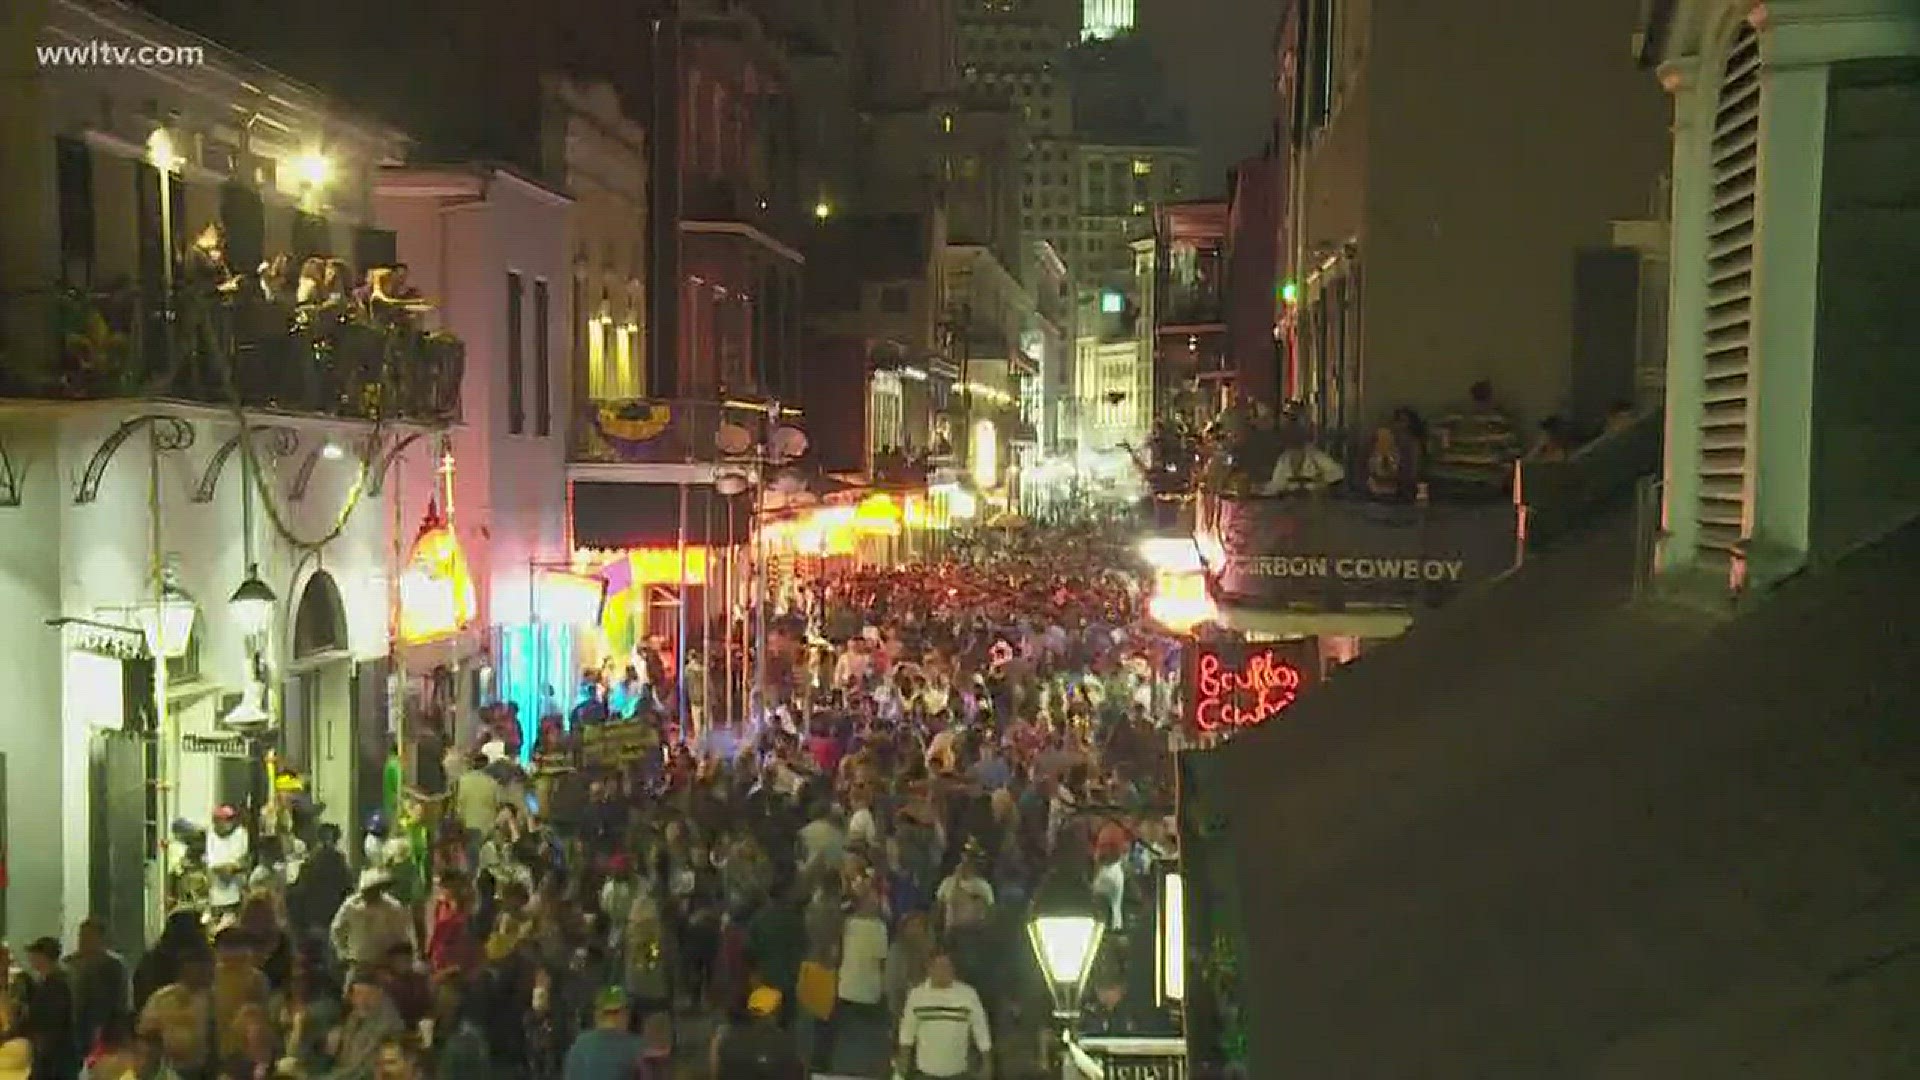 As Mardi Gras is dwindling down, many flock to Bourbon Street to get their last few hours of partying in before Ash Wednesday.